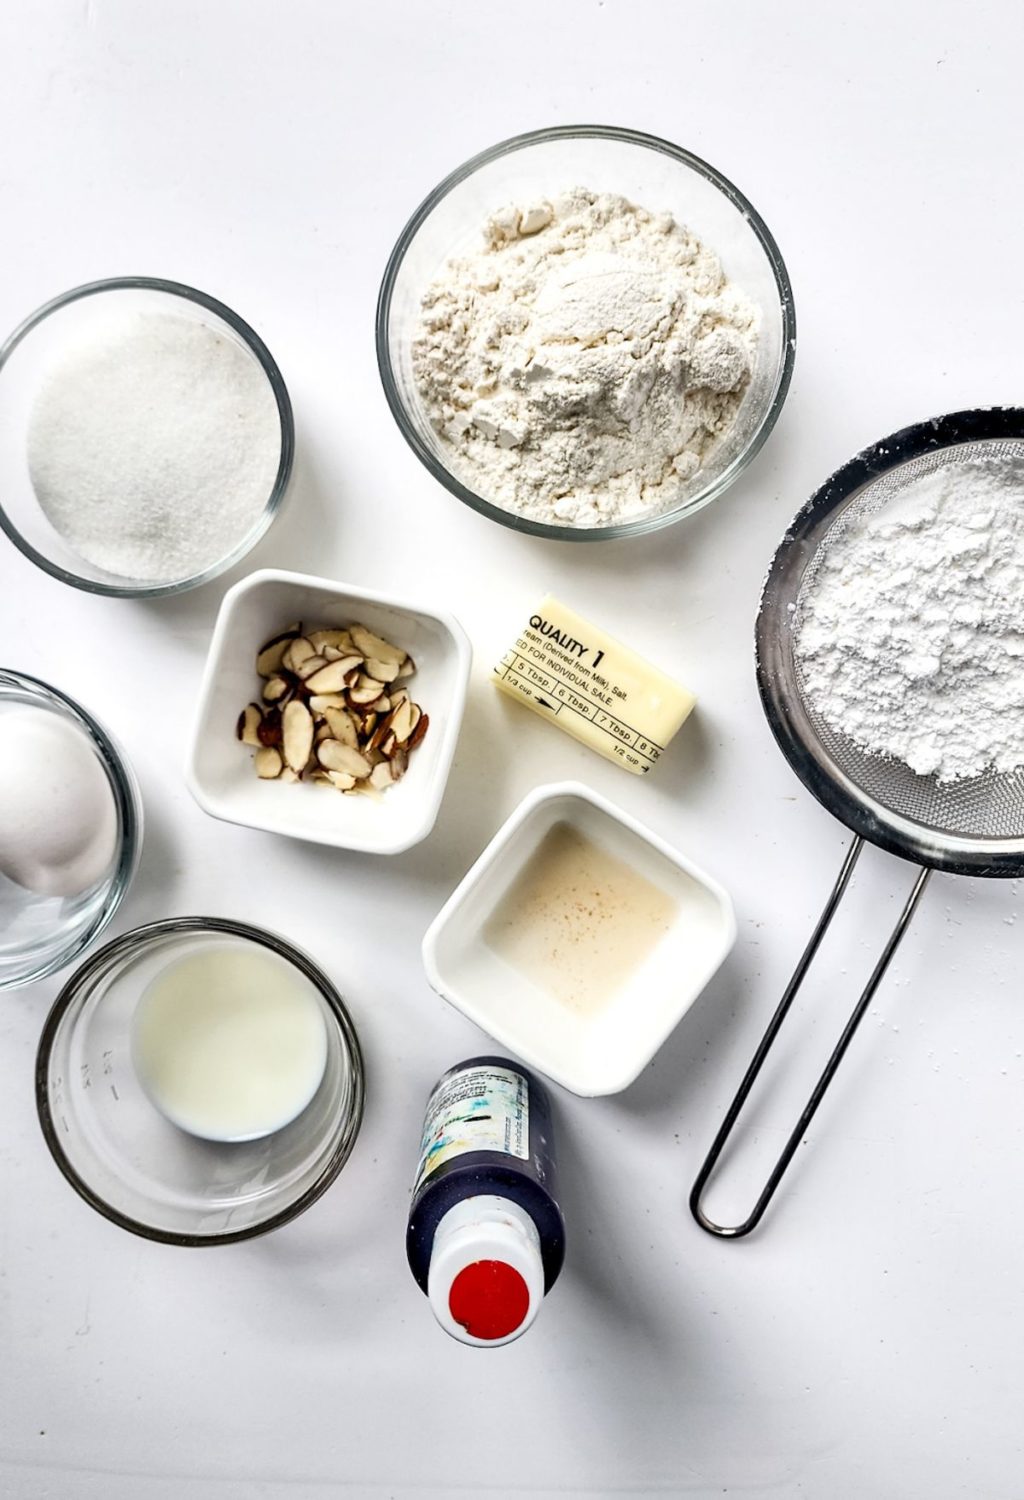 The ingredients for a cookie recipe are laid out on a white surface.